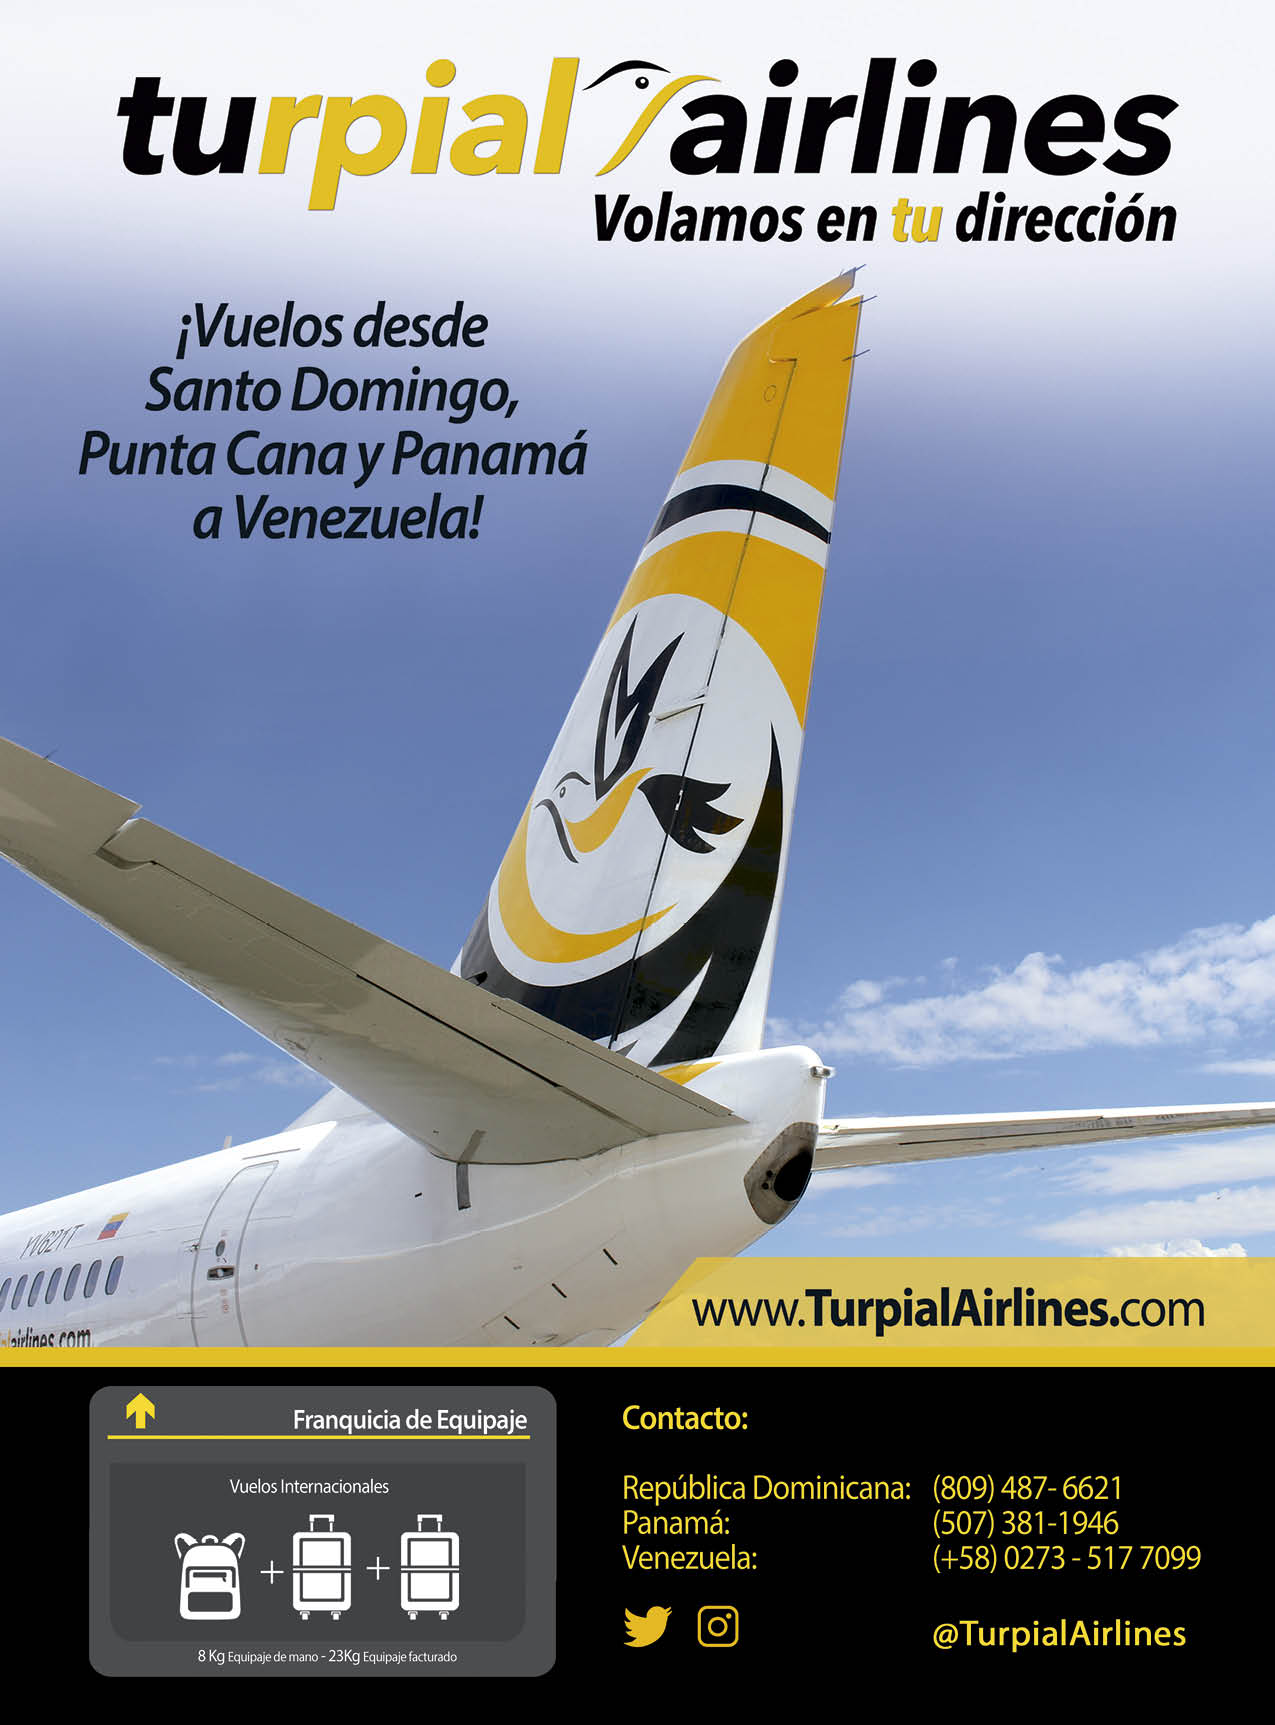 Turpial Airlines